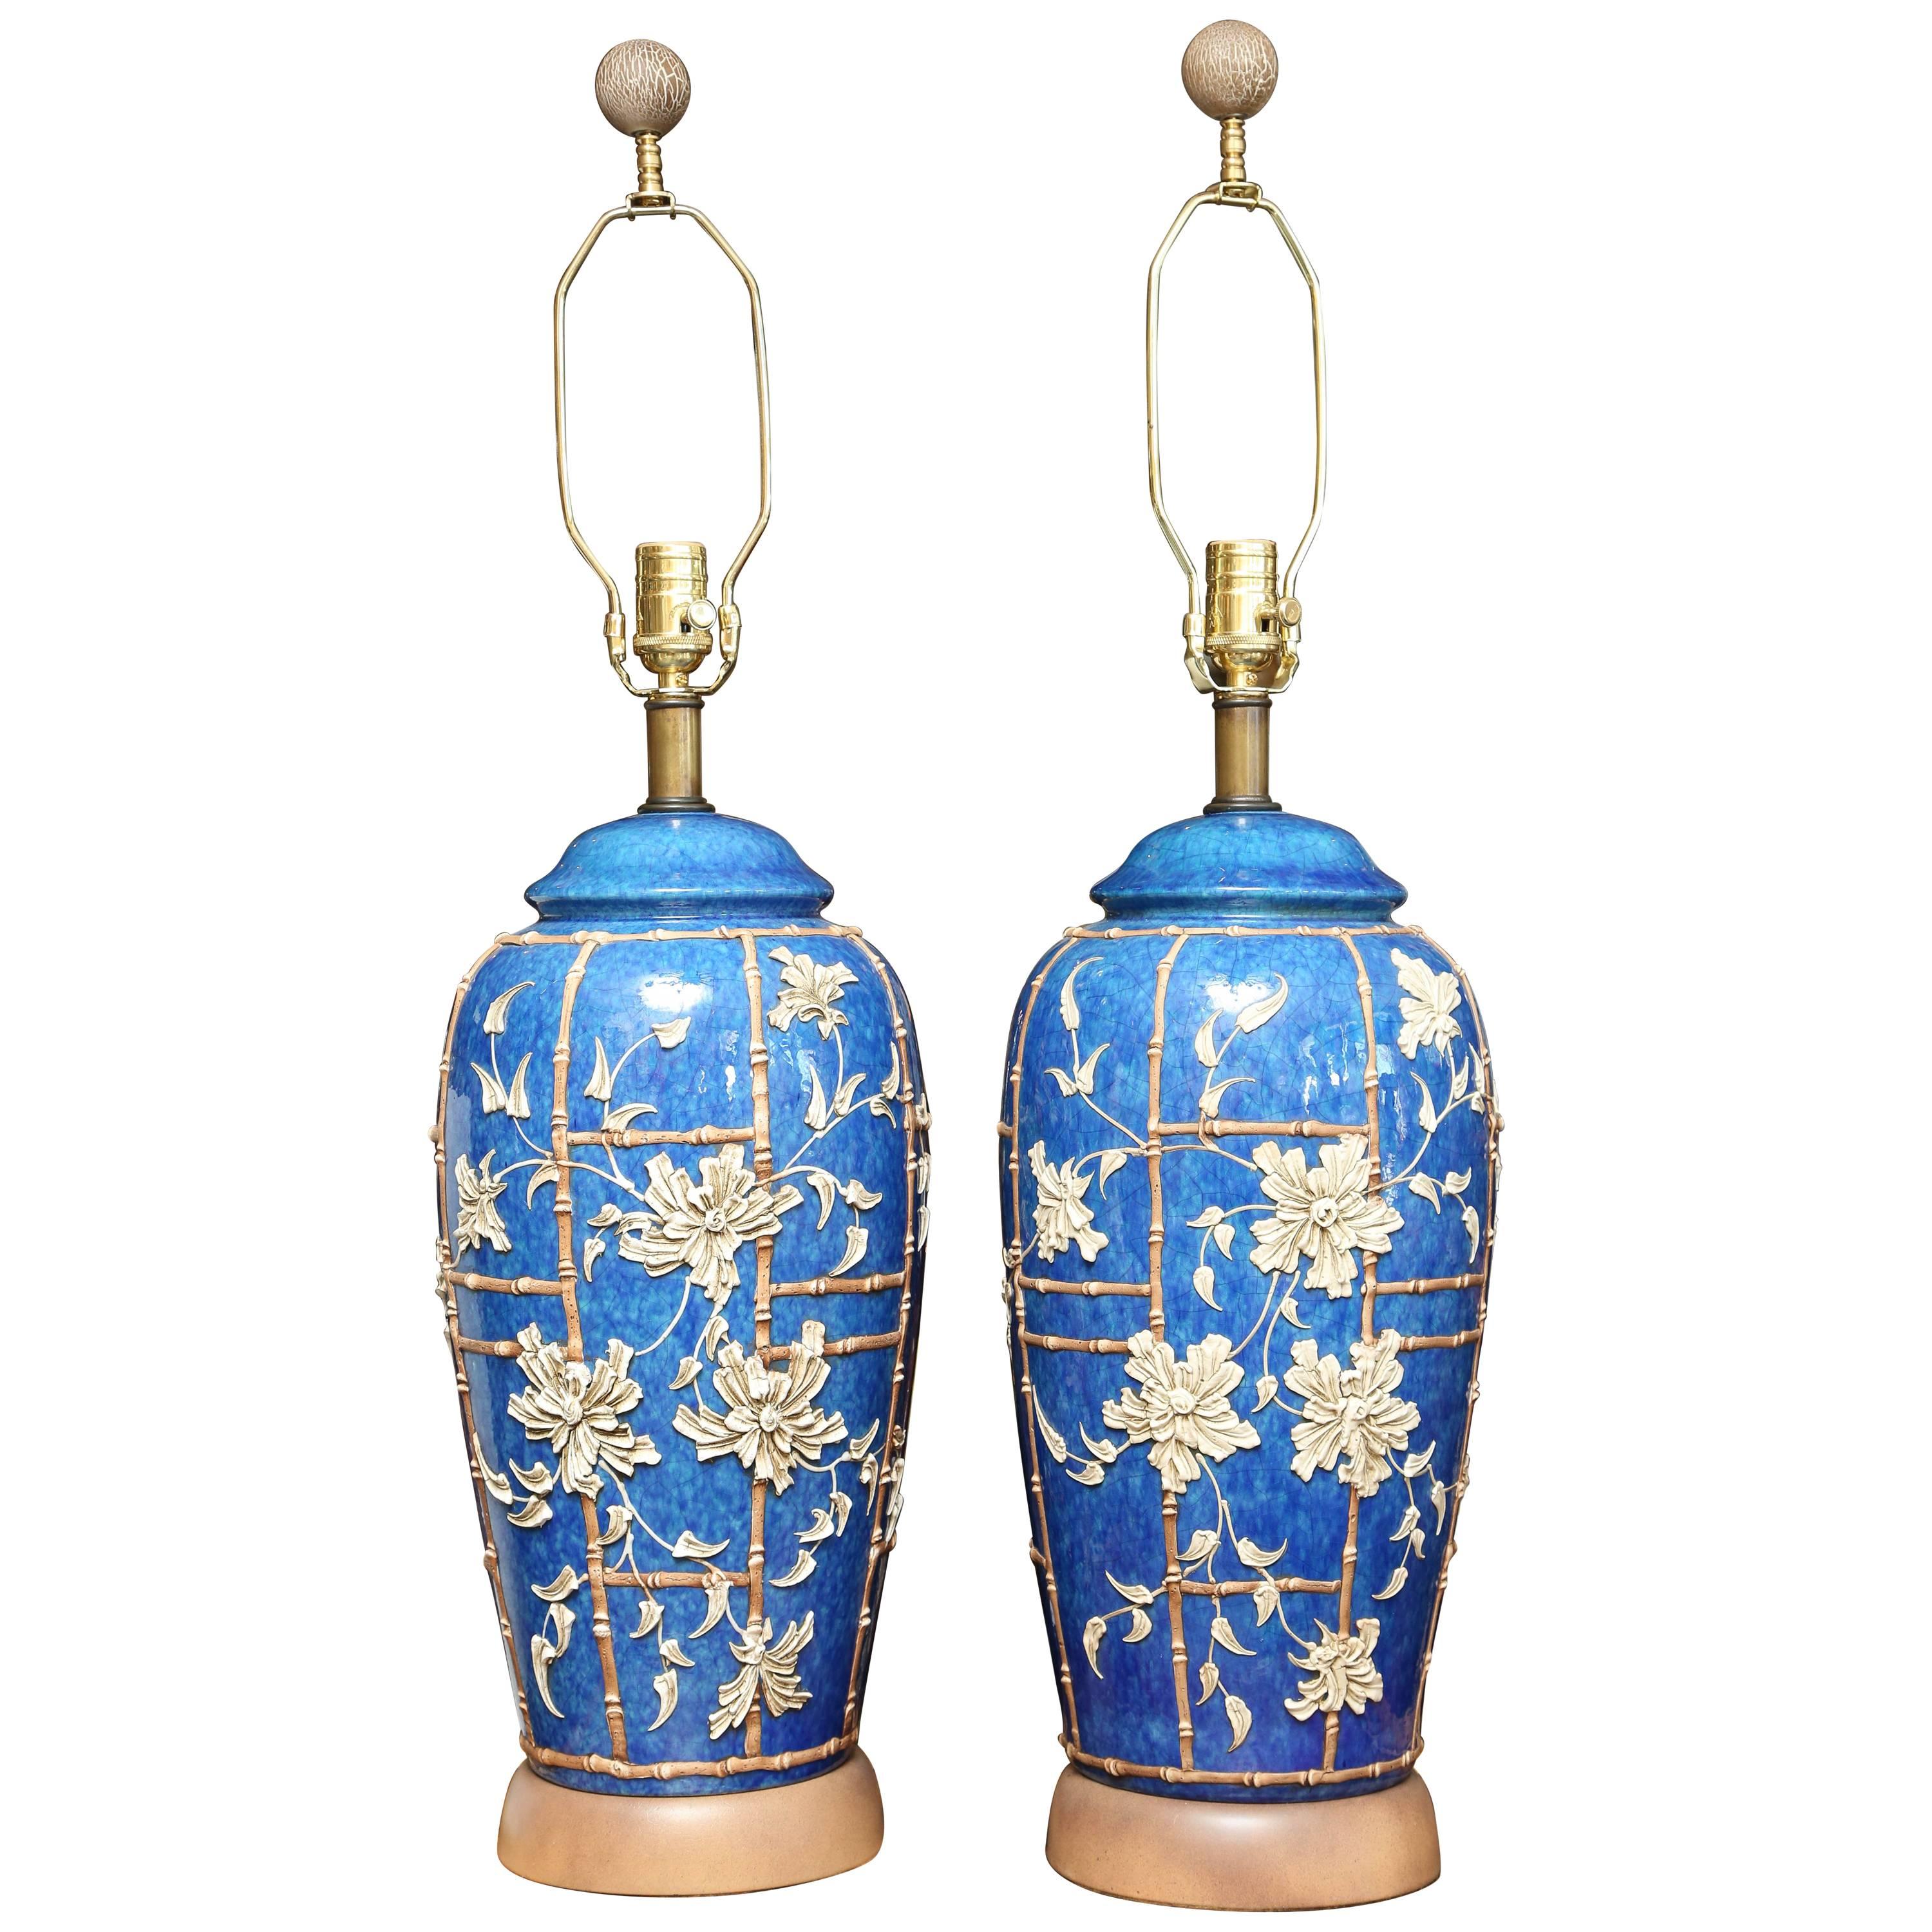 Superb Pair of Chinese Lamps with "Bamboo" Accents